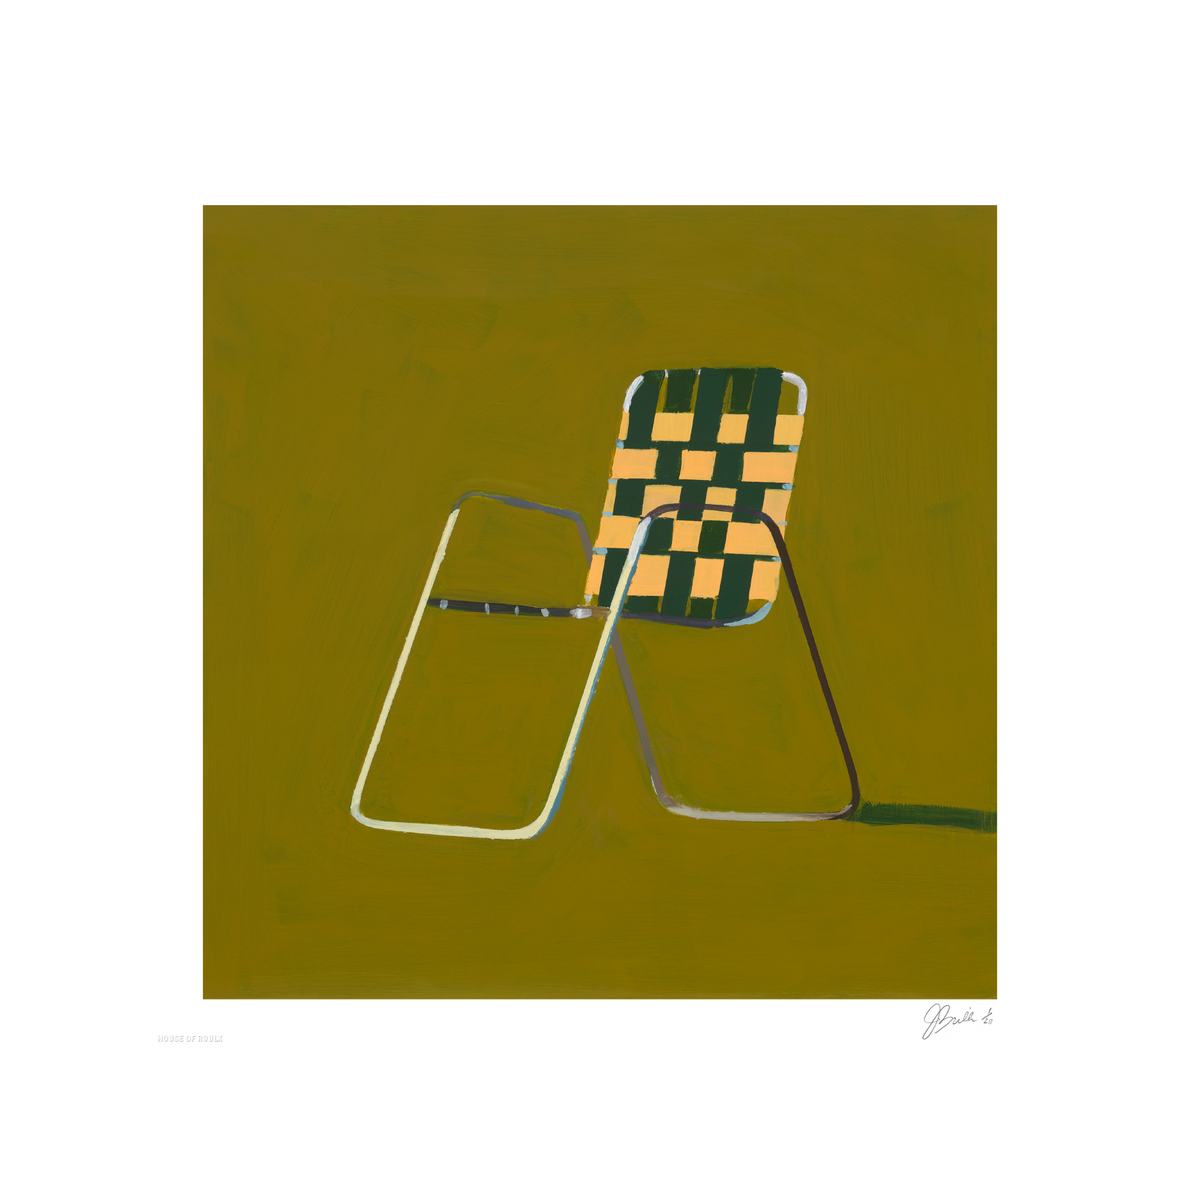 Jessica Brilli &quot;Green Lawn Chair&quot; - Archival Print, Limited Edition of 20 - 12 x 12&quot;